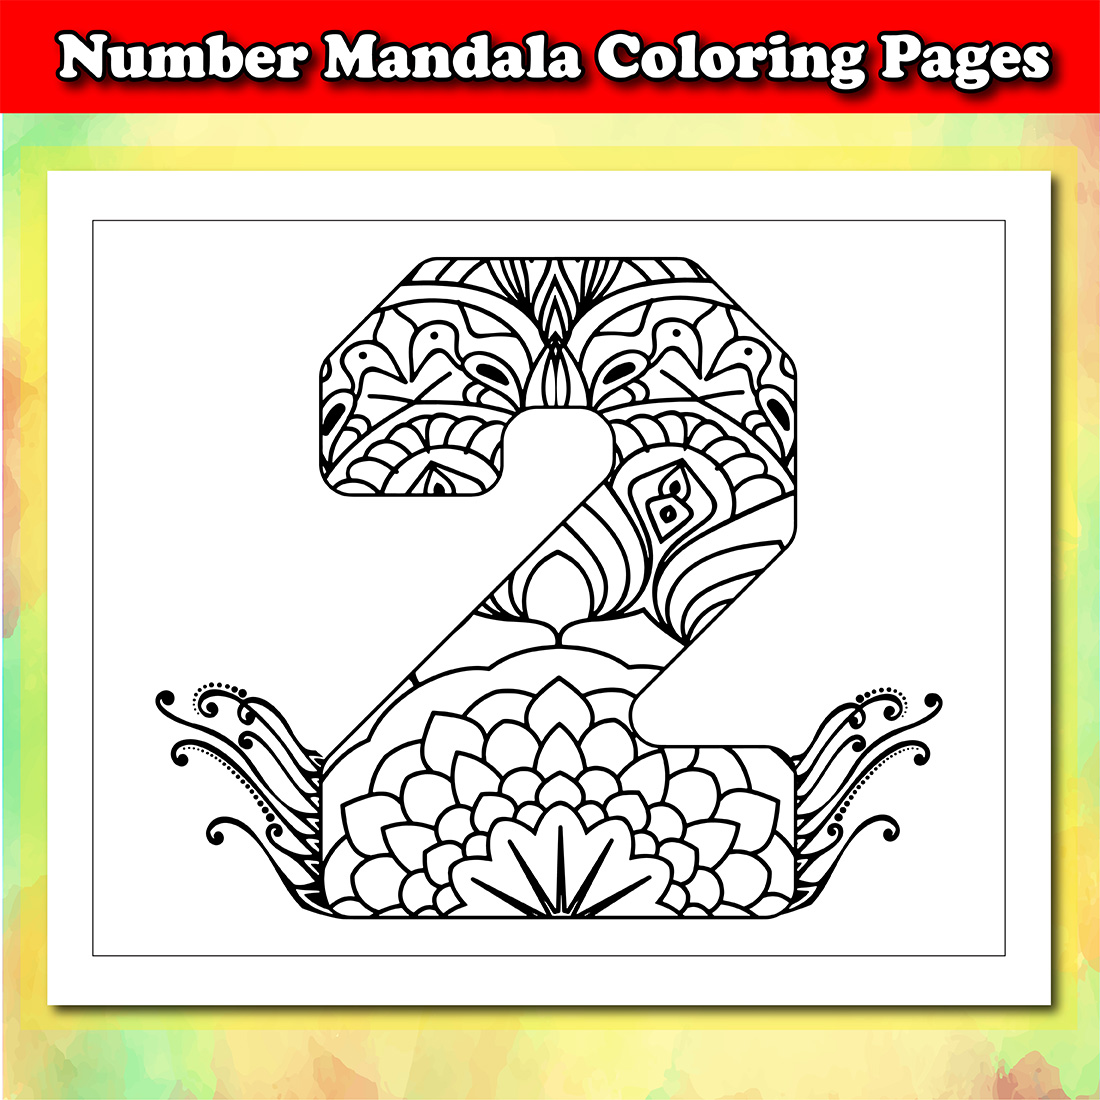 Number Mandala Coloring Pages cover image.